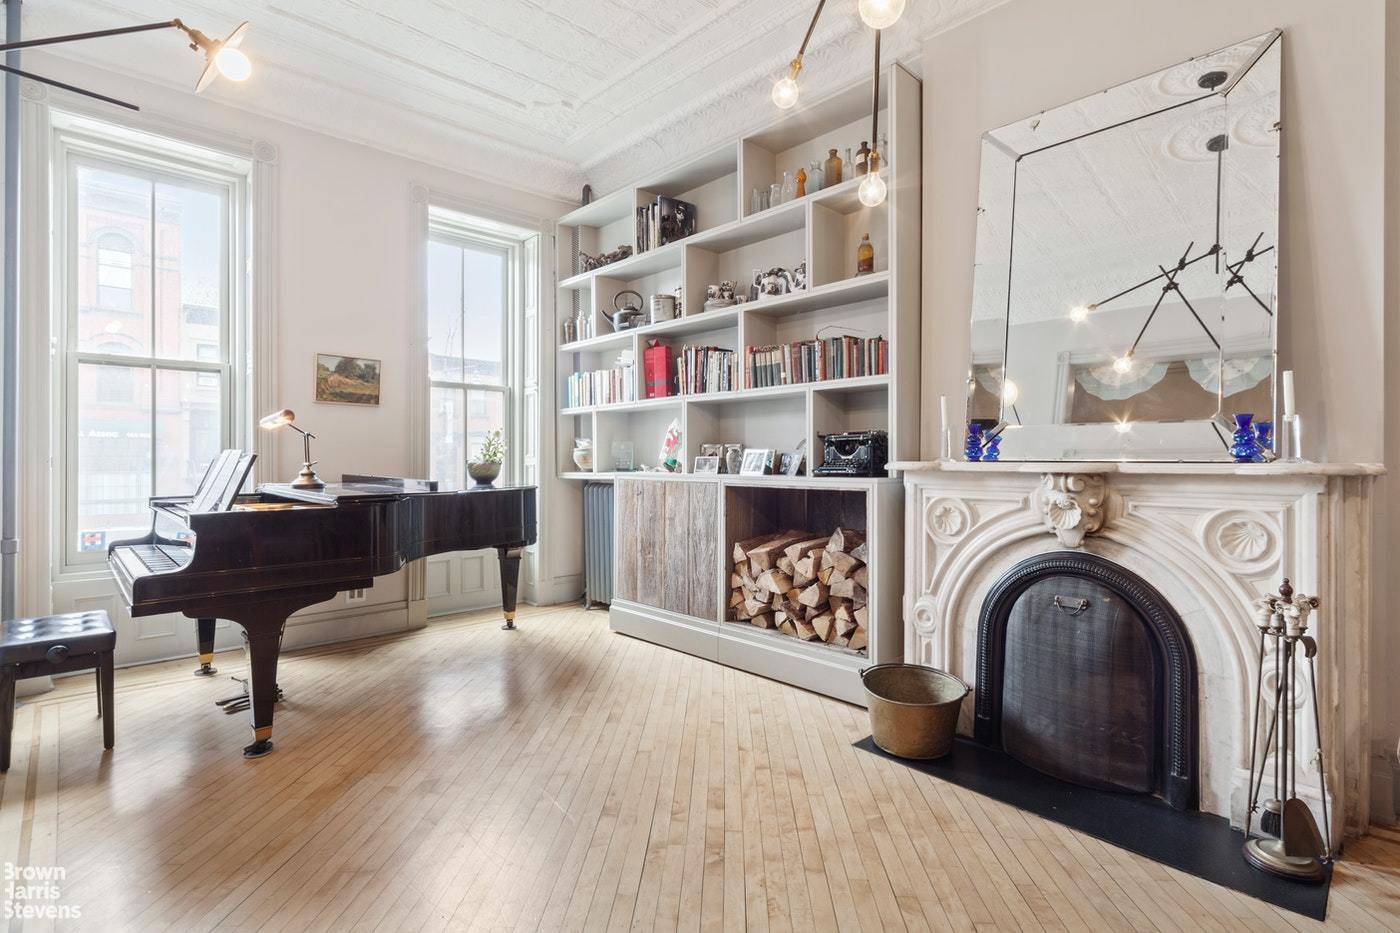 Furnished 4BR Townhouse Rental w Optional In Law Nanny 1BR Garden Unit Set in the heart of Park Slope, this 2390sf elegantly designed triplex occupies the upper levels of a ...